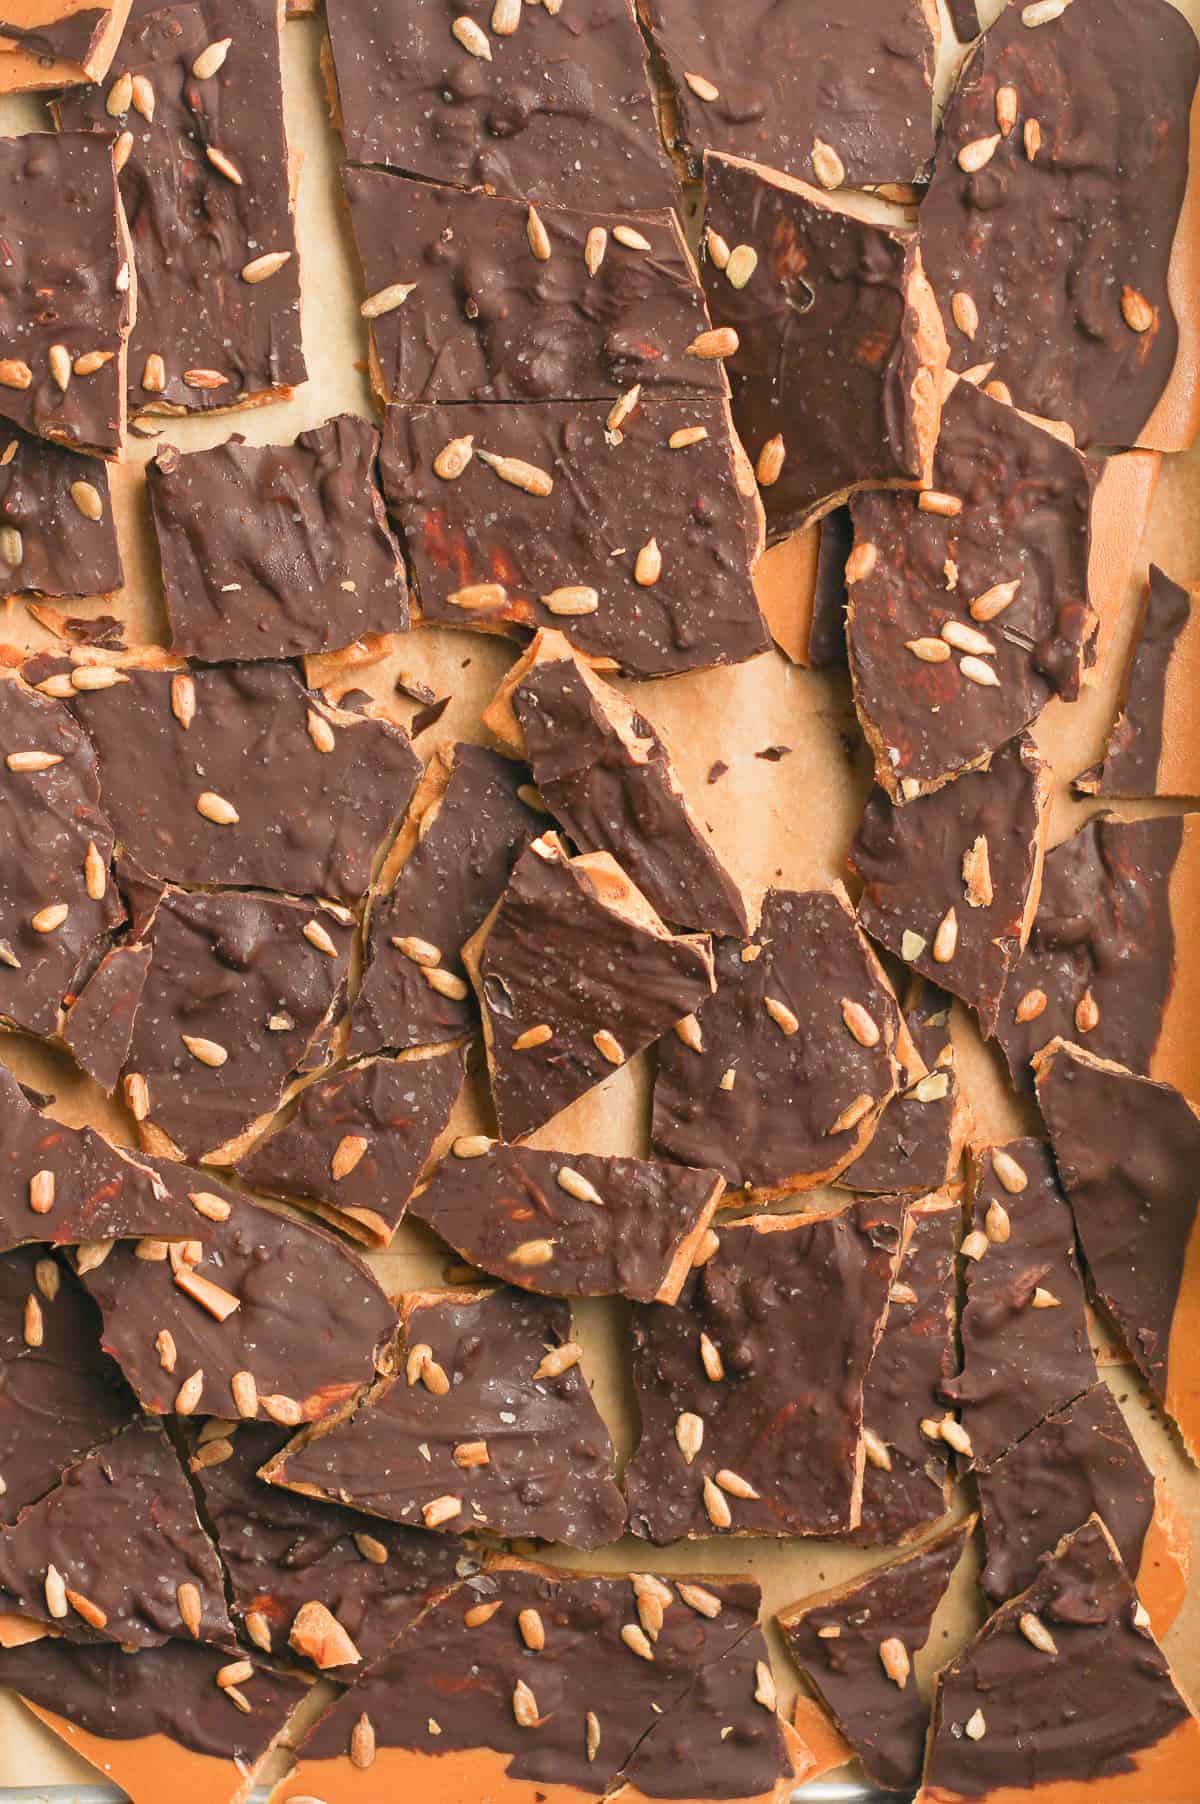 The broken up dark chocolate toffee on a pan.